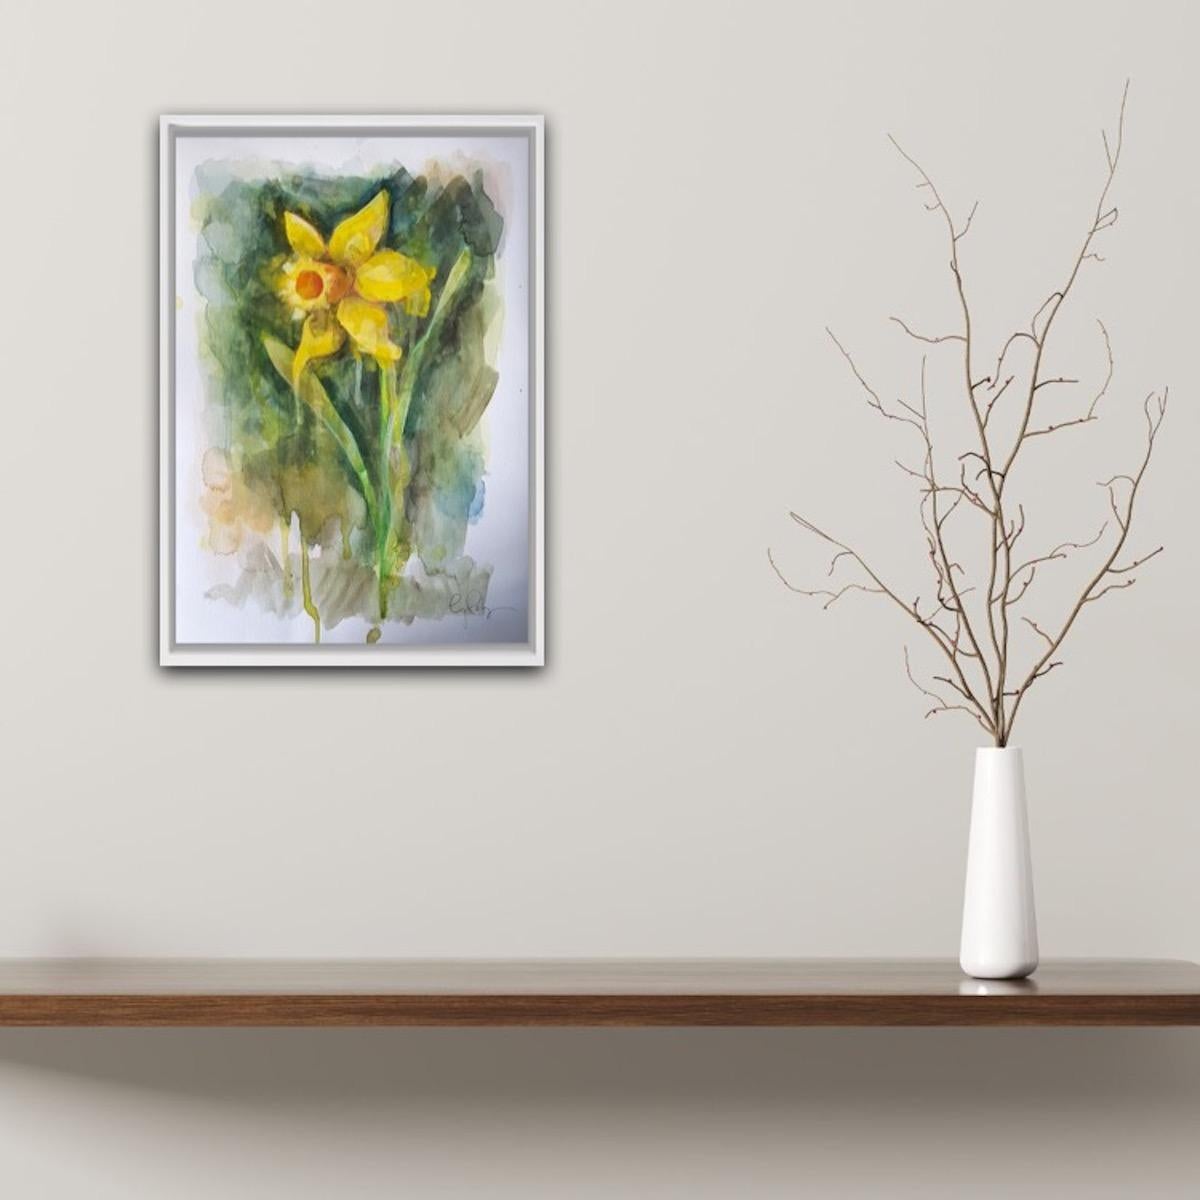 Daffodil by Gavin Dobson, contemporary art, original painting, watercolour paint 10